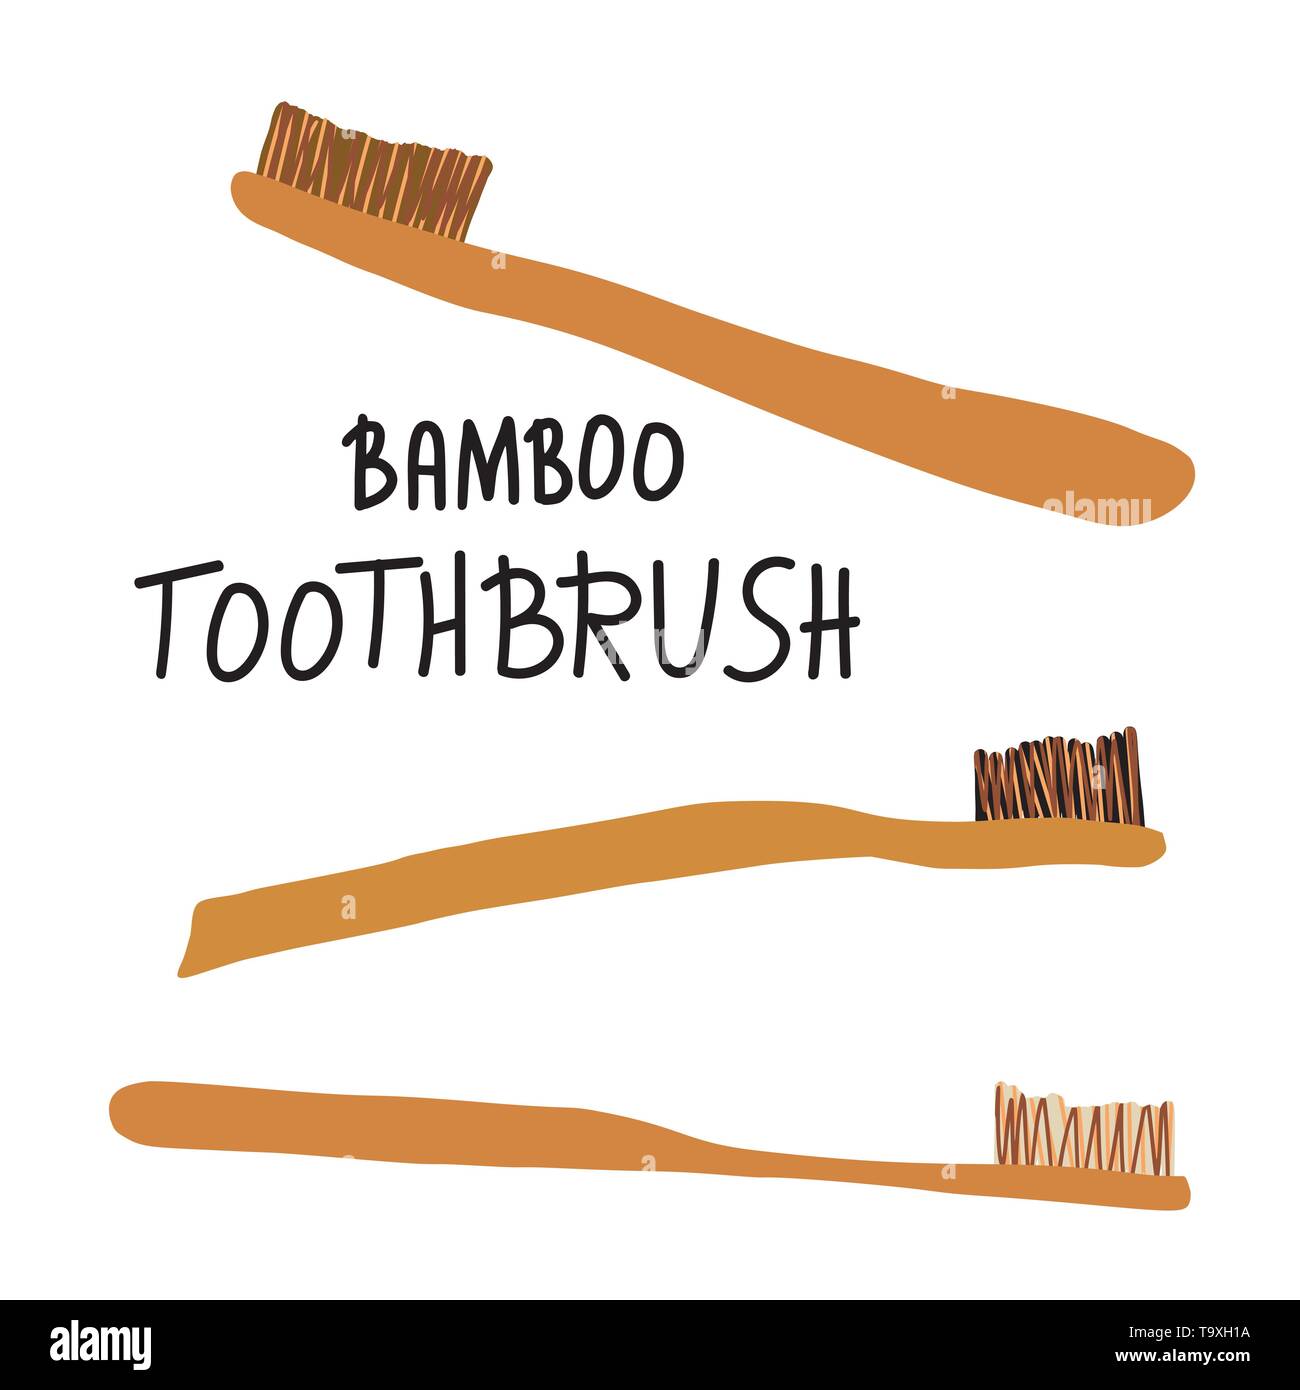 Bamboo toothbrushes set isolated. Zero waste tips. Eco-friendly brushes with handwritten lettering. Vector illustration. Stock Vector